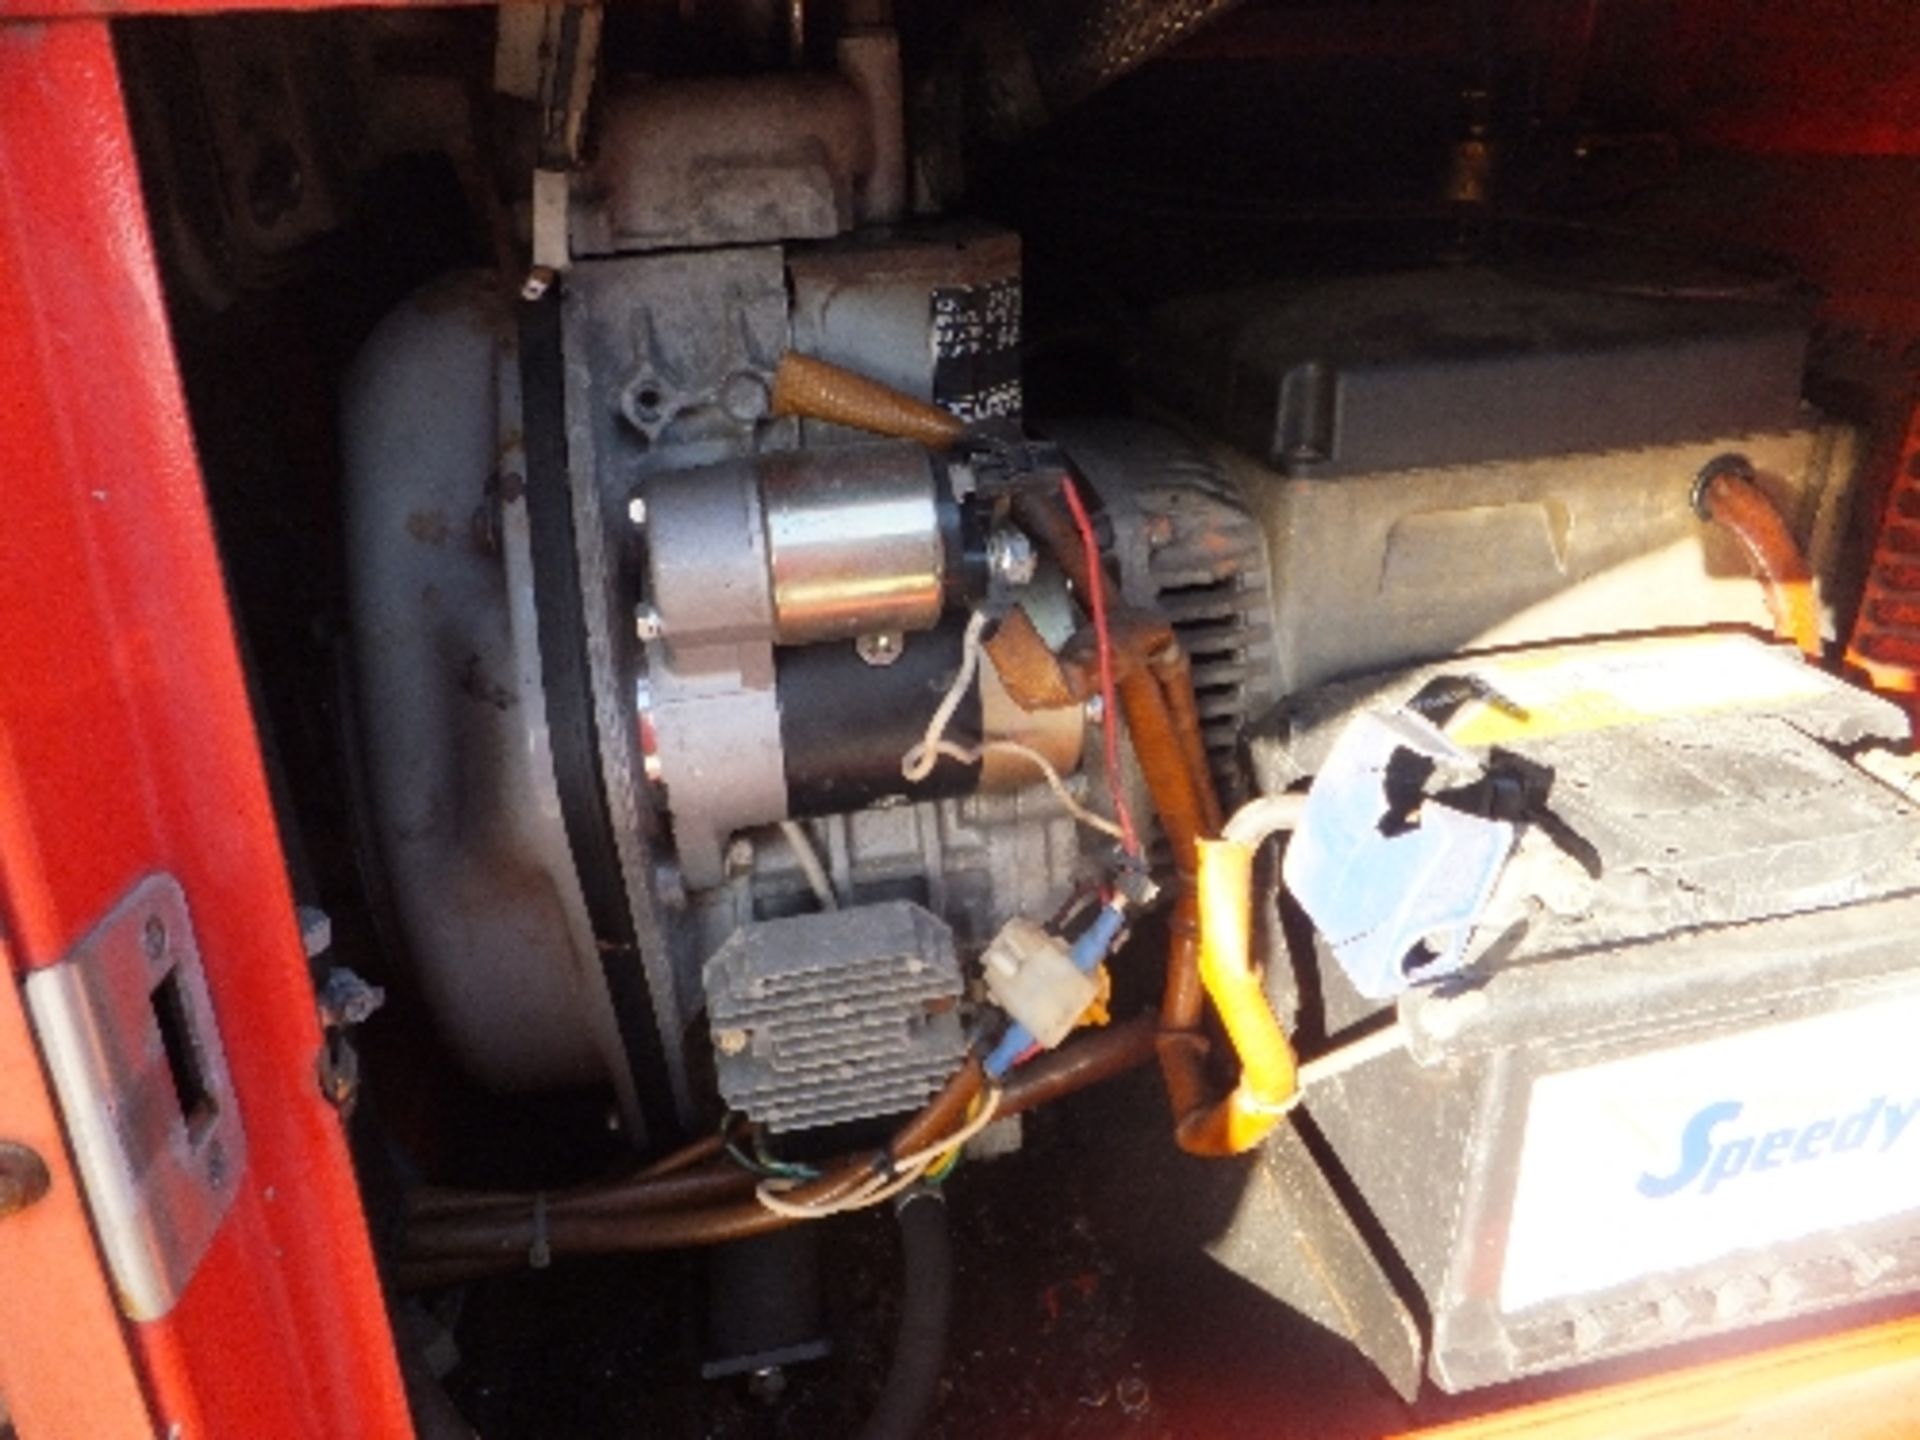 Superlight VT2 road tow towerlight Yanmar/Linz 220082W002455 Fuel pump missing - Image 2 of 3